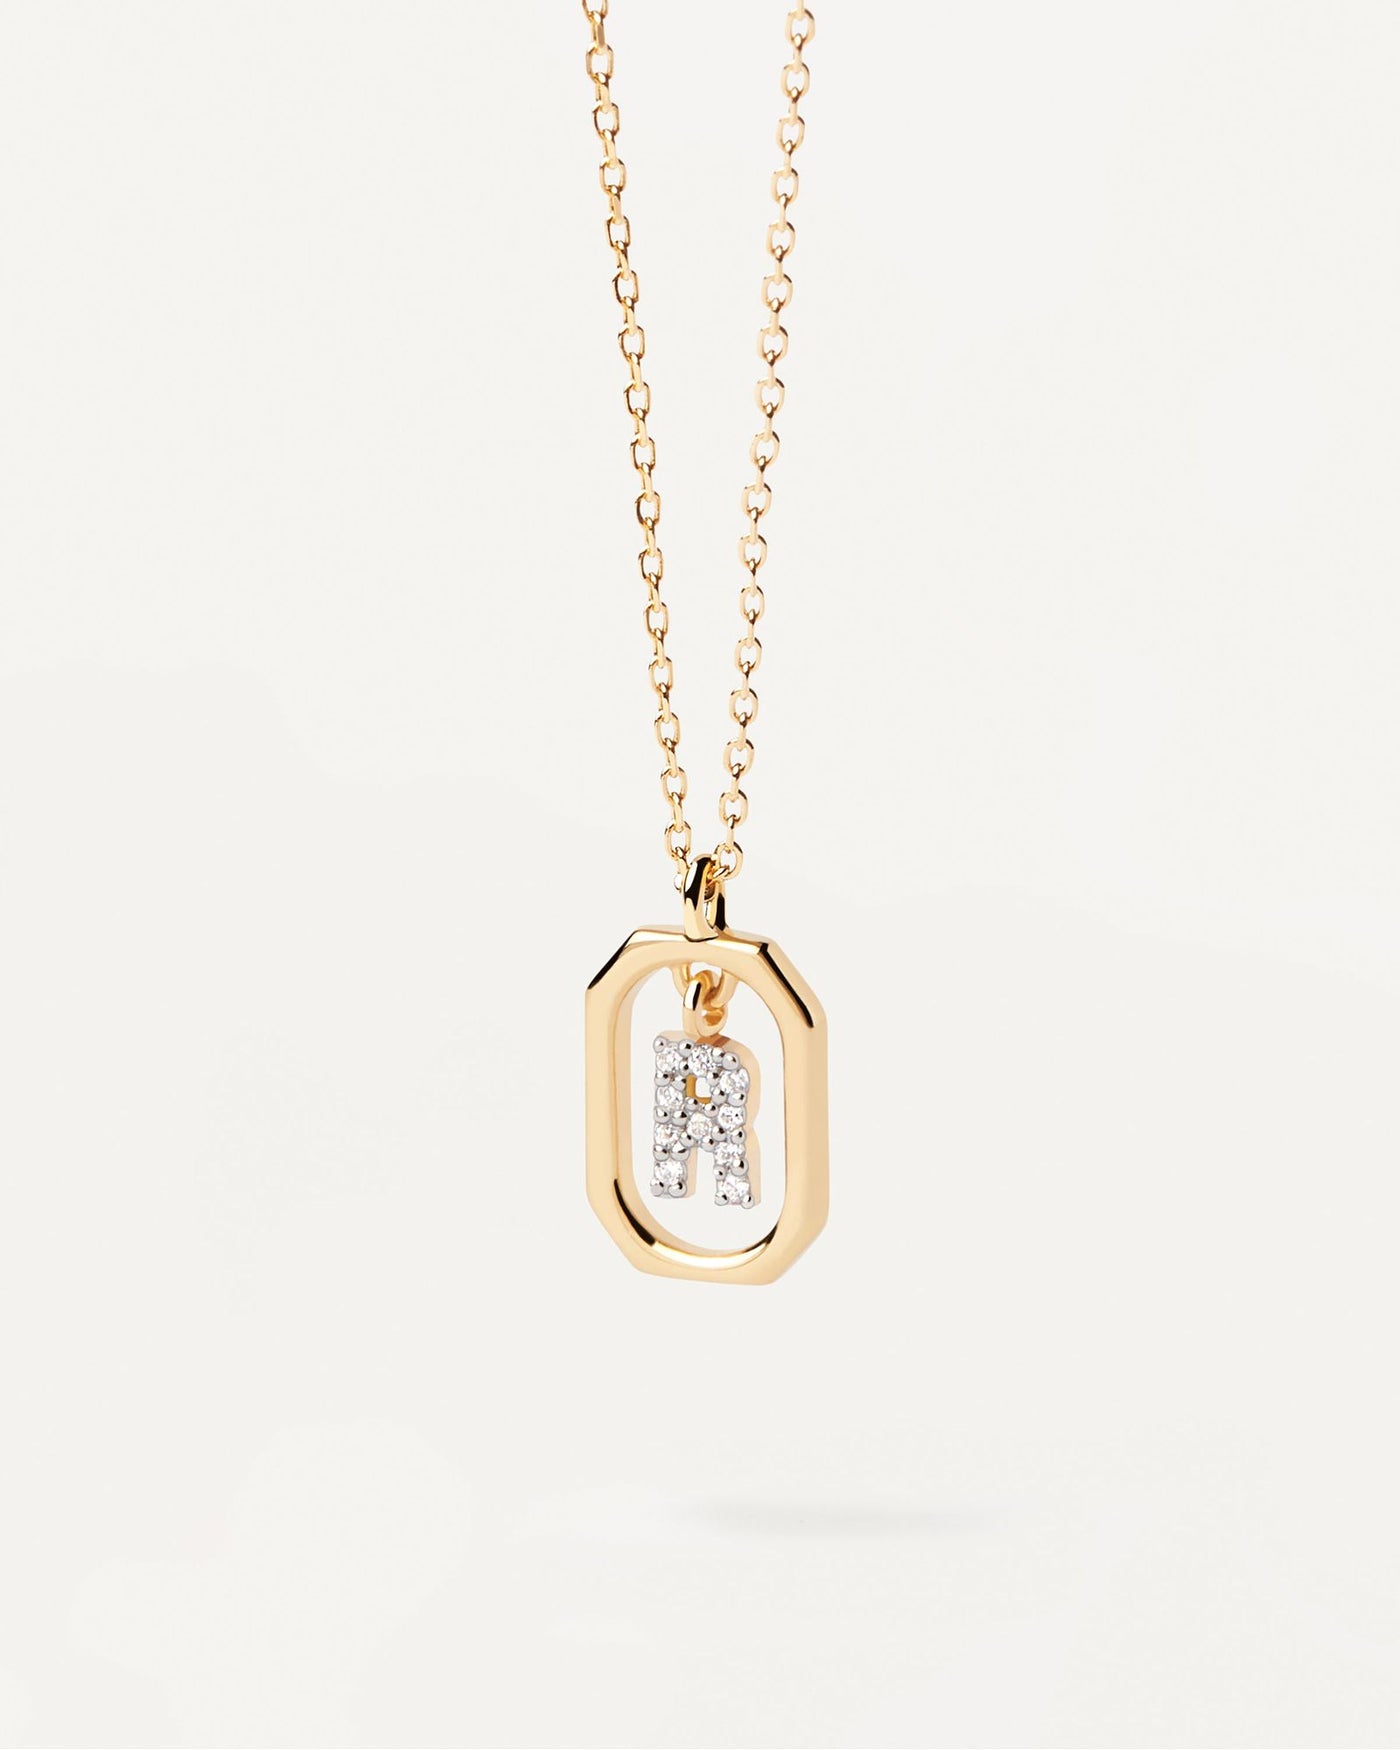 2024 Selection | Mini Letter R Necklace. Small initial R necklace in zirconia inside gold-plated silver octagonal pendant. Get the latest arrival from PDPAOLA. Place your order safely and get this Best Seller. Free Shipping.